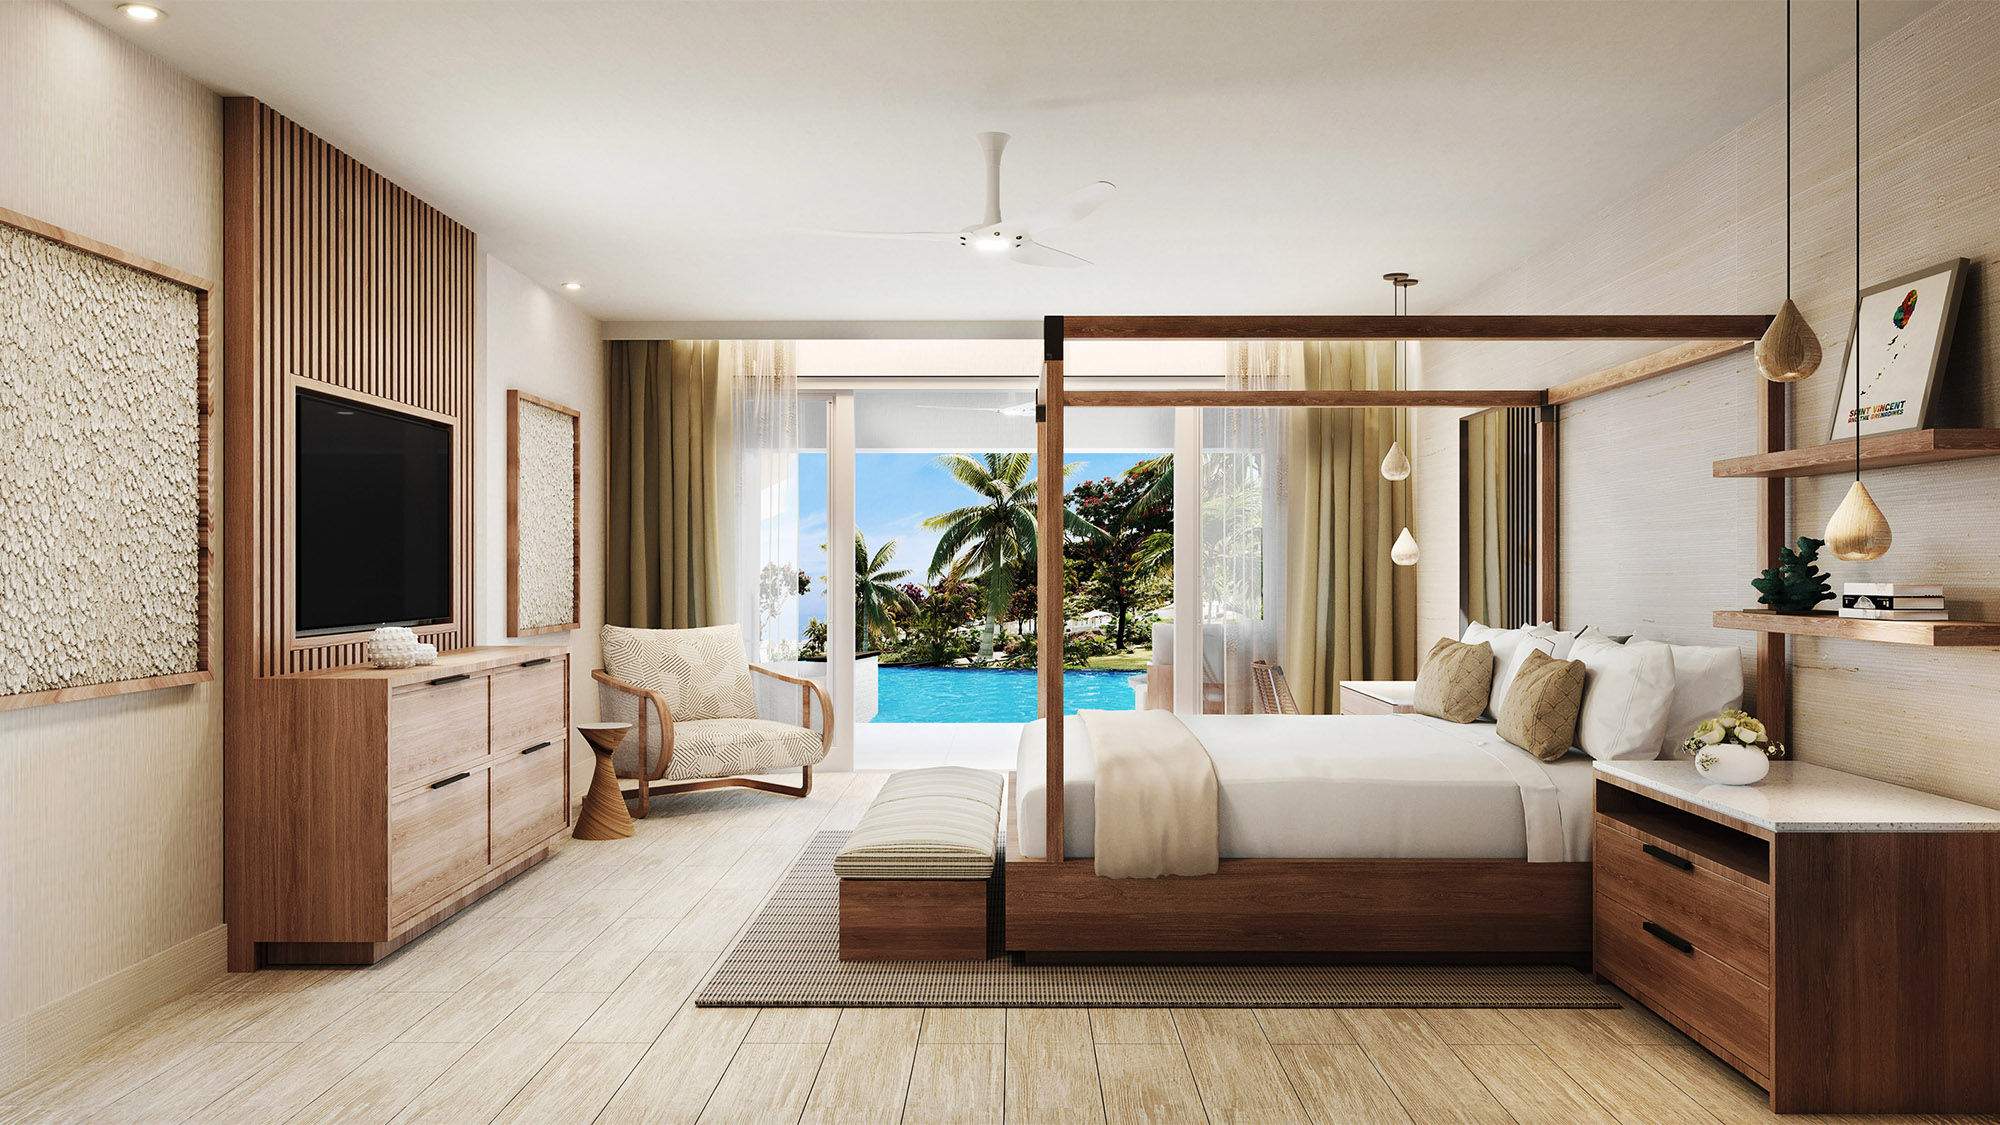 The bedroom of a swim-up suite at the Sandals Saint Vincent and the Grenadines.